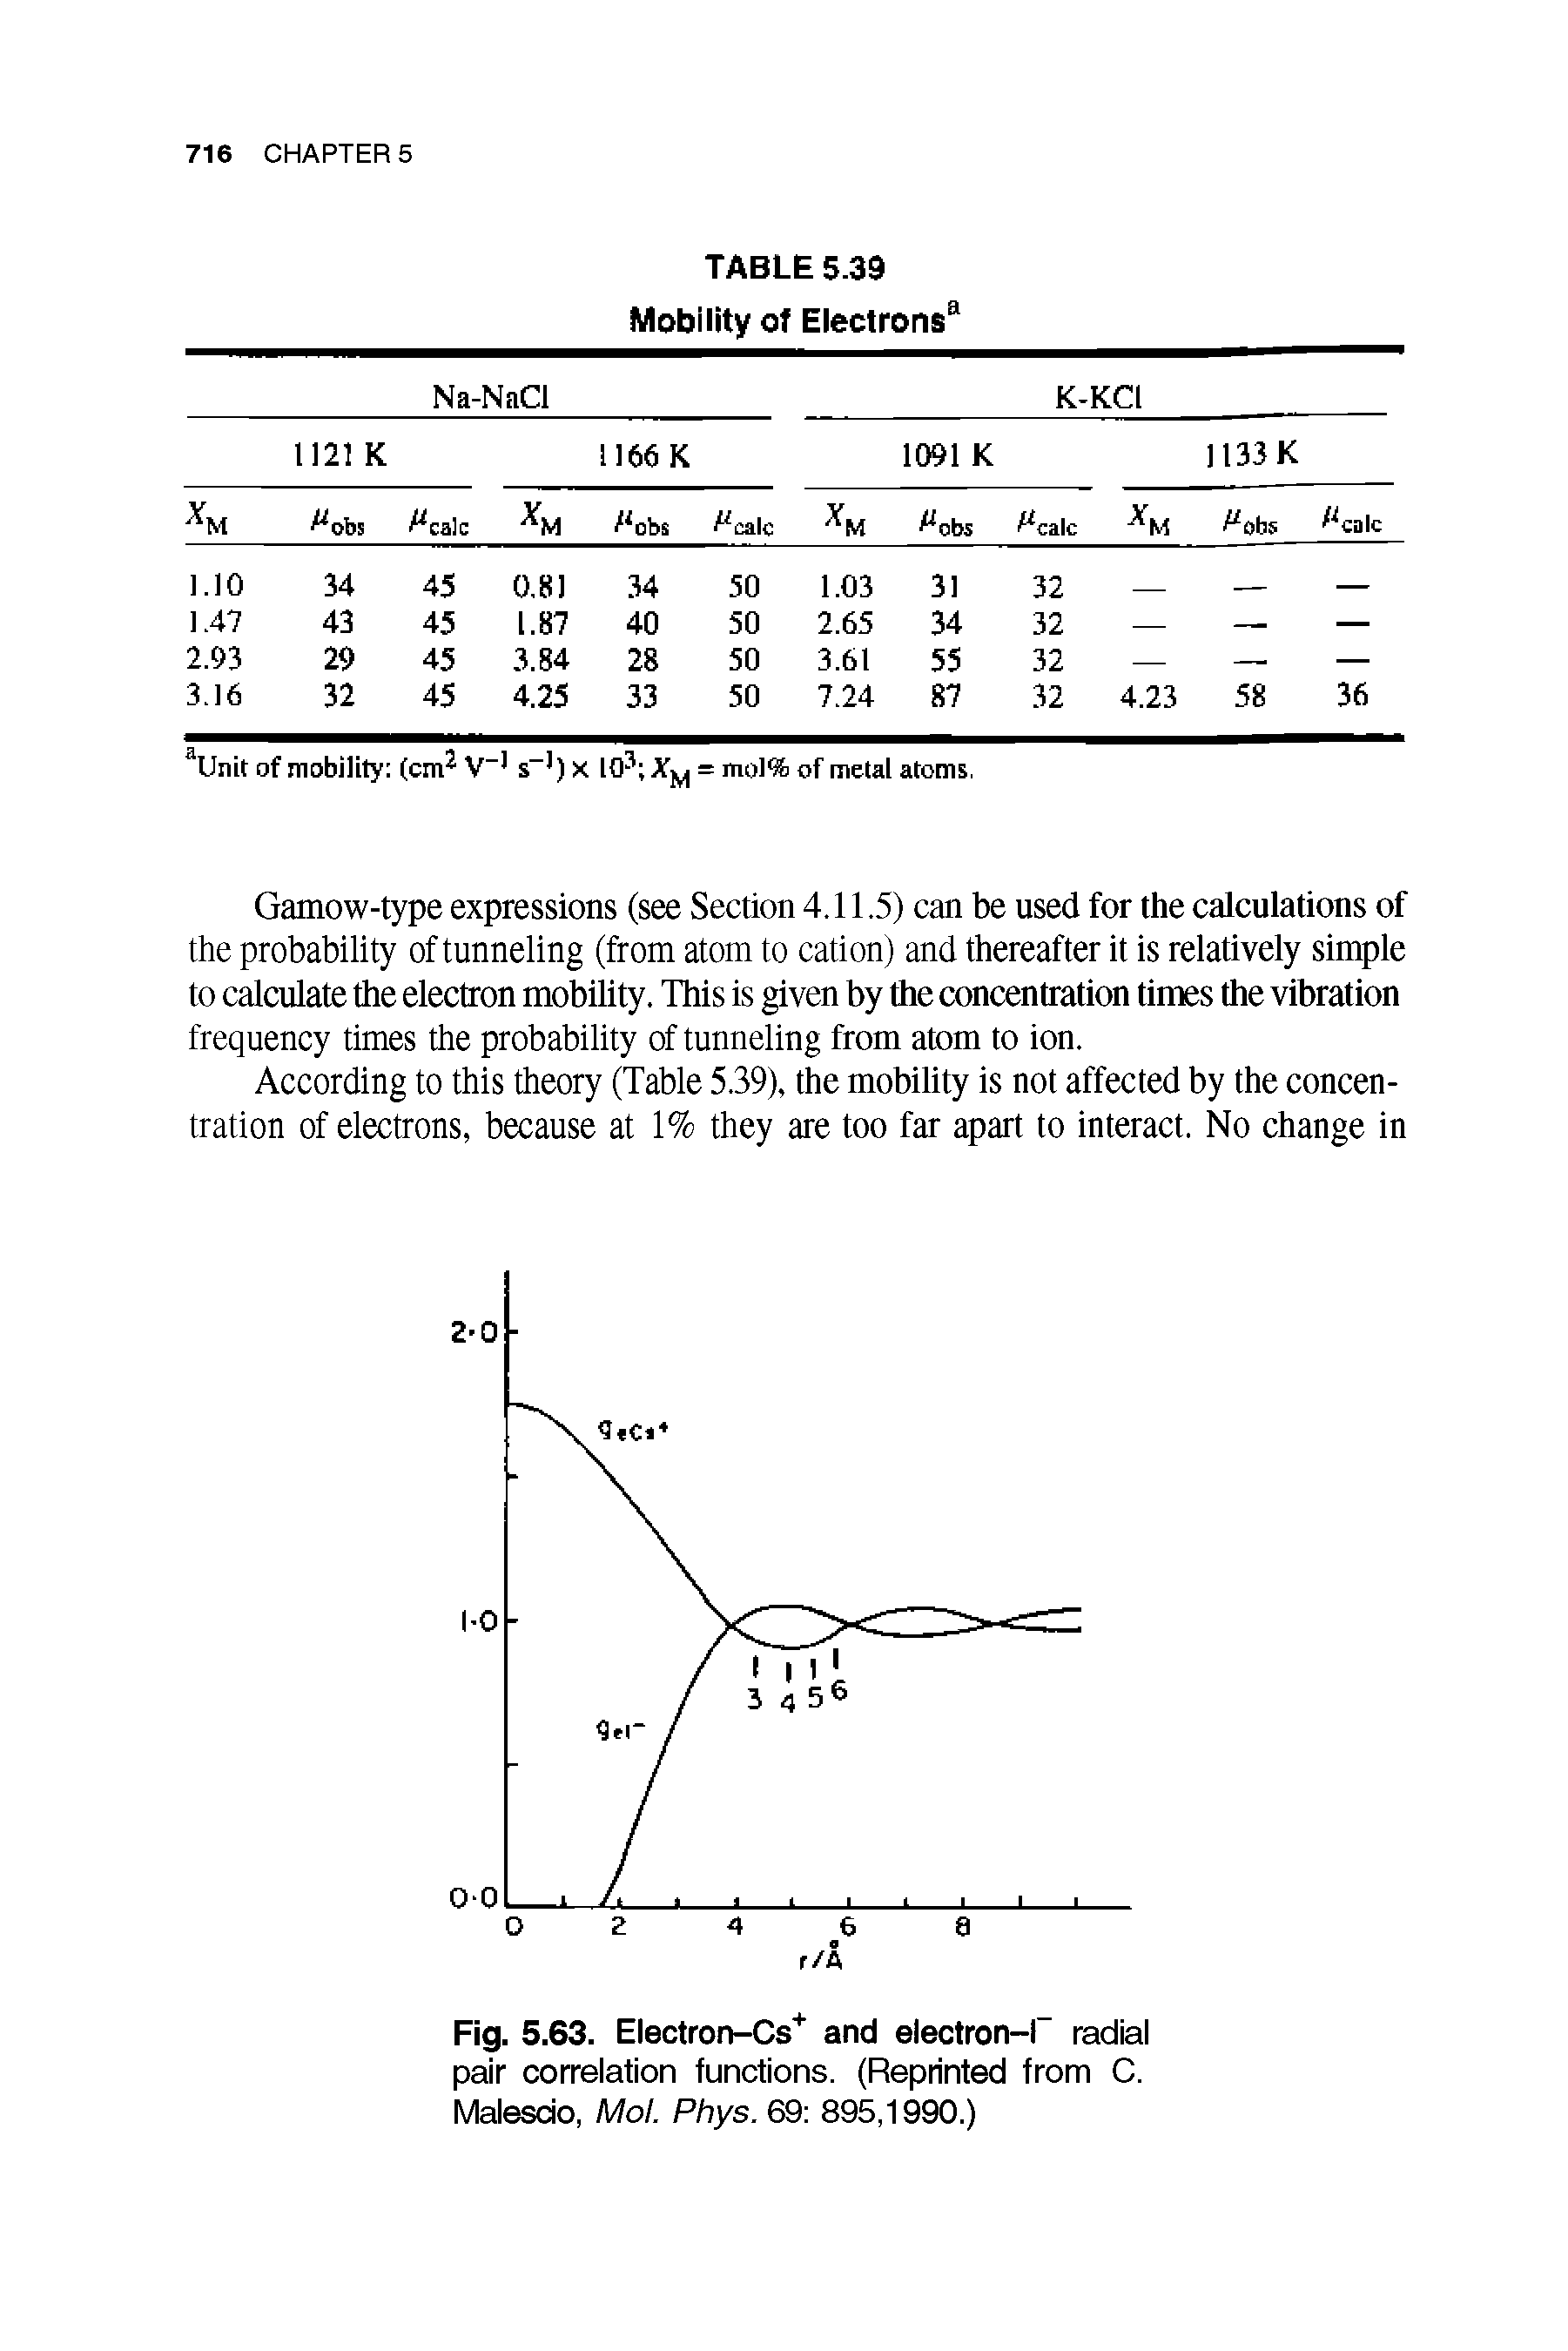 Fig. 5.63. Electron-Cs" and electron-f radial pair correlation functions. (Reprinted from C. Malesdo, Mol. Phys. 69 895,1990.)...